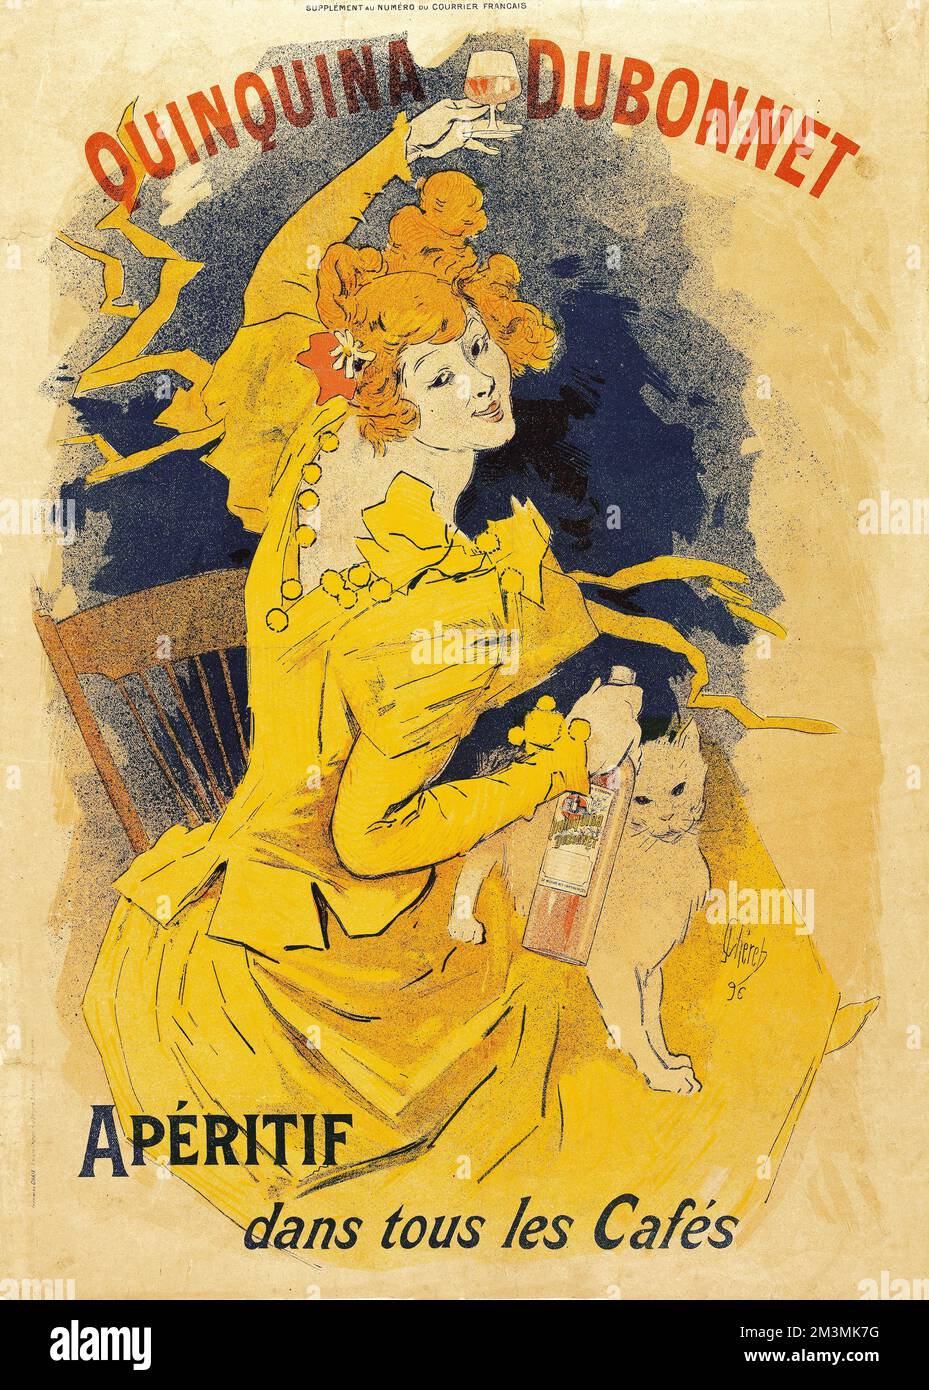 Quinquina Dubonnet. Aperitif dans tous les Cafés - Aperitif in all cafes - poster by Jules Chéret feat a woman in yellow with a bottle and a cat - 1 Stock Photo